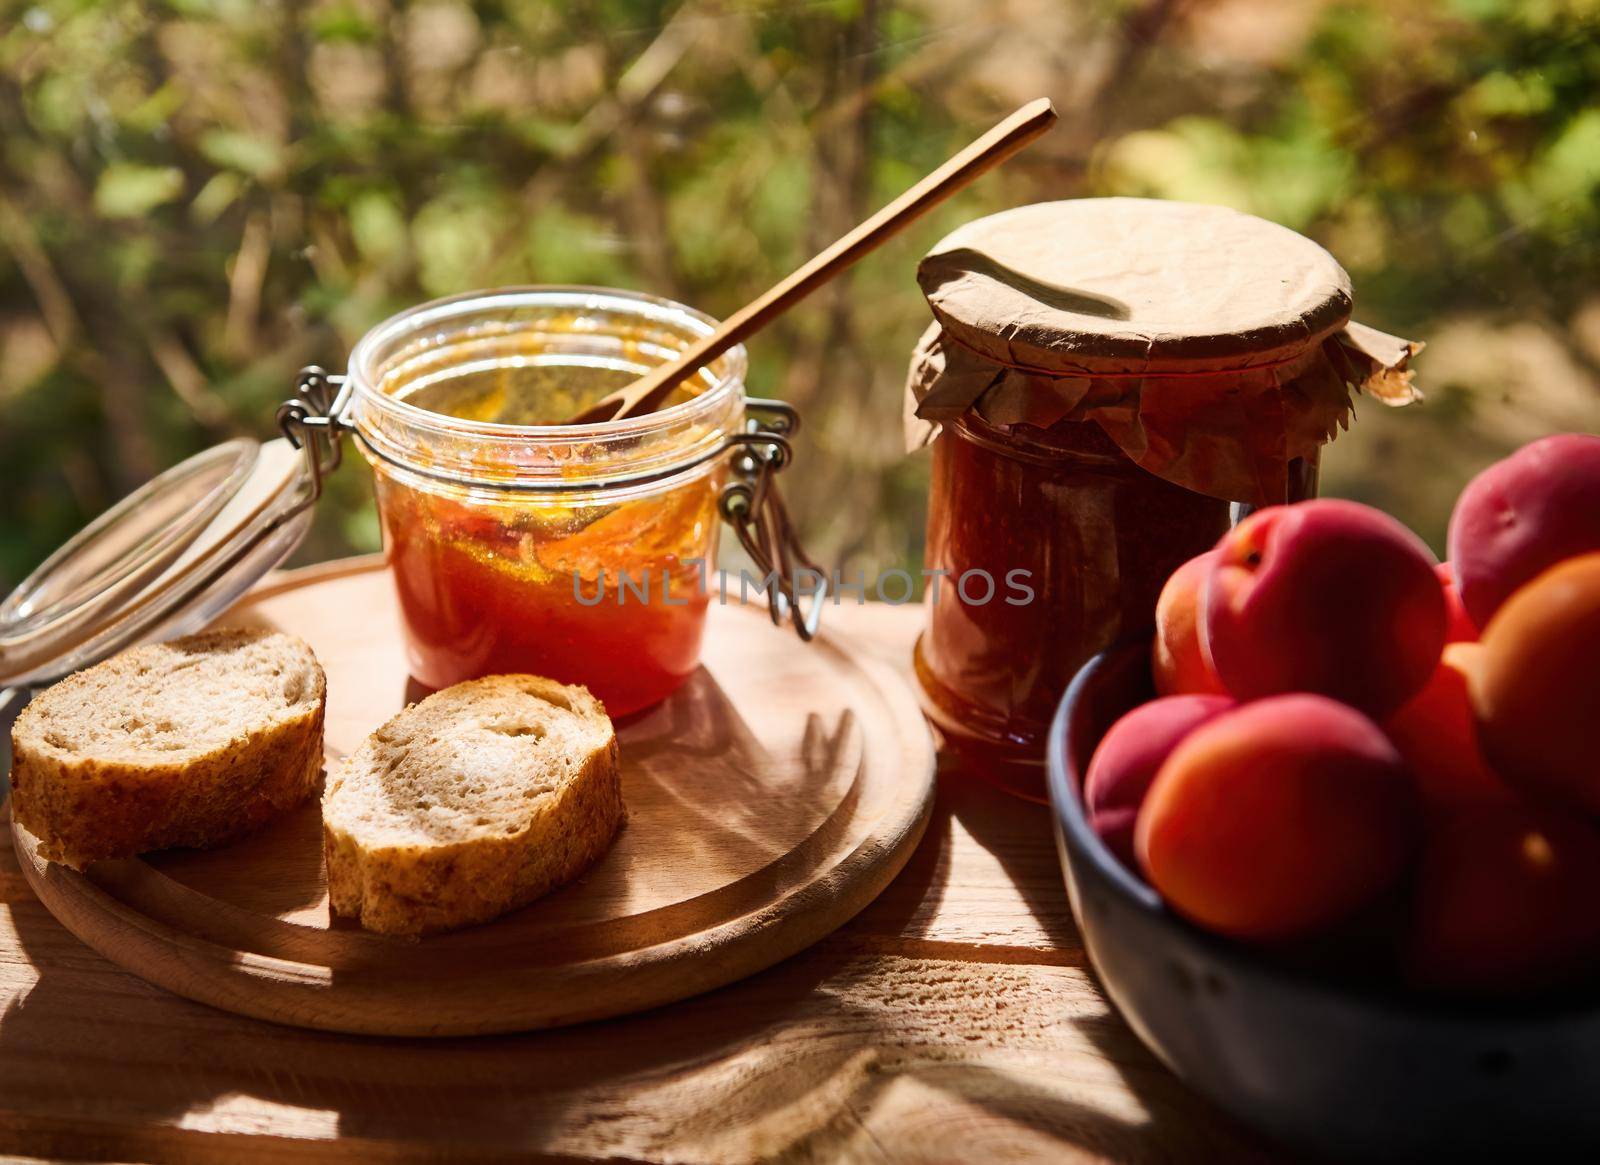 Close-up of delicious ripe red apricots in a blue ceramic bowl on a wooden table with a glass jar of homemade apricot confiture and slices of freshly baked whole grain bread. Rustic style. Still life